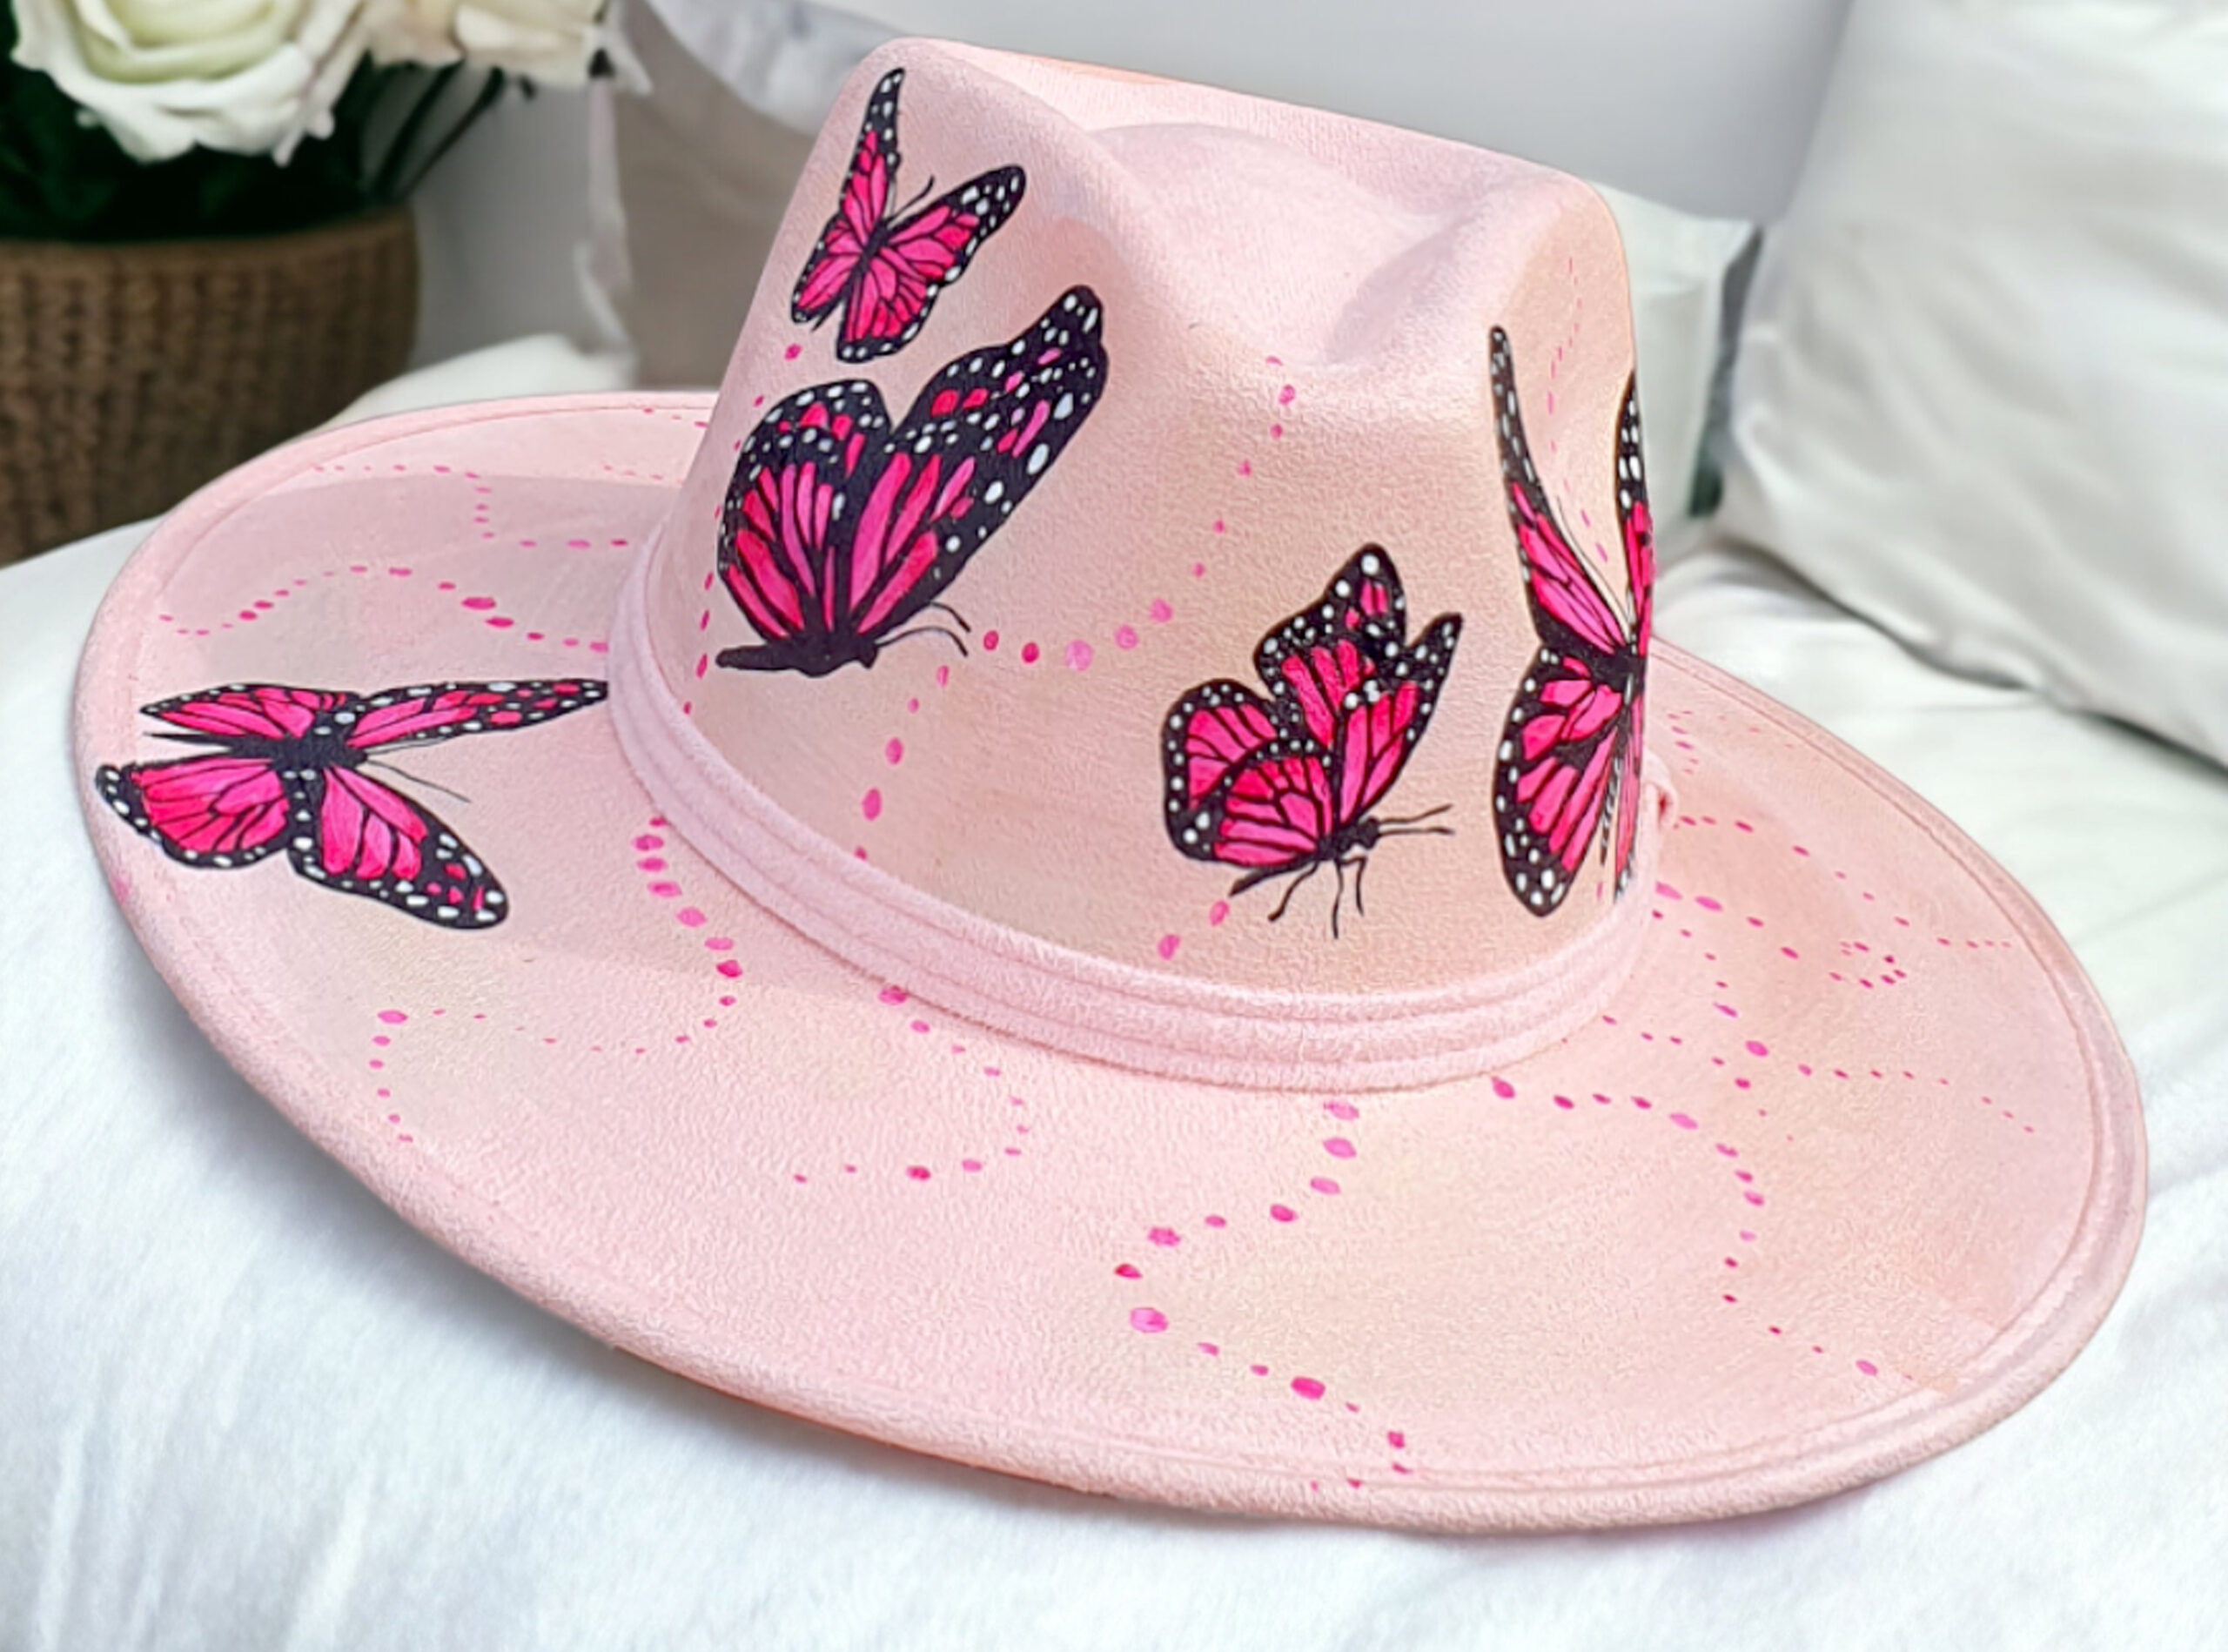 handmade hat painted with pink butterflies and camelon details